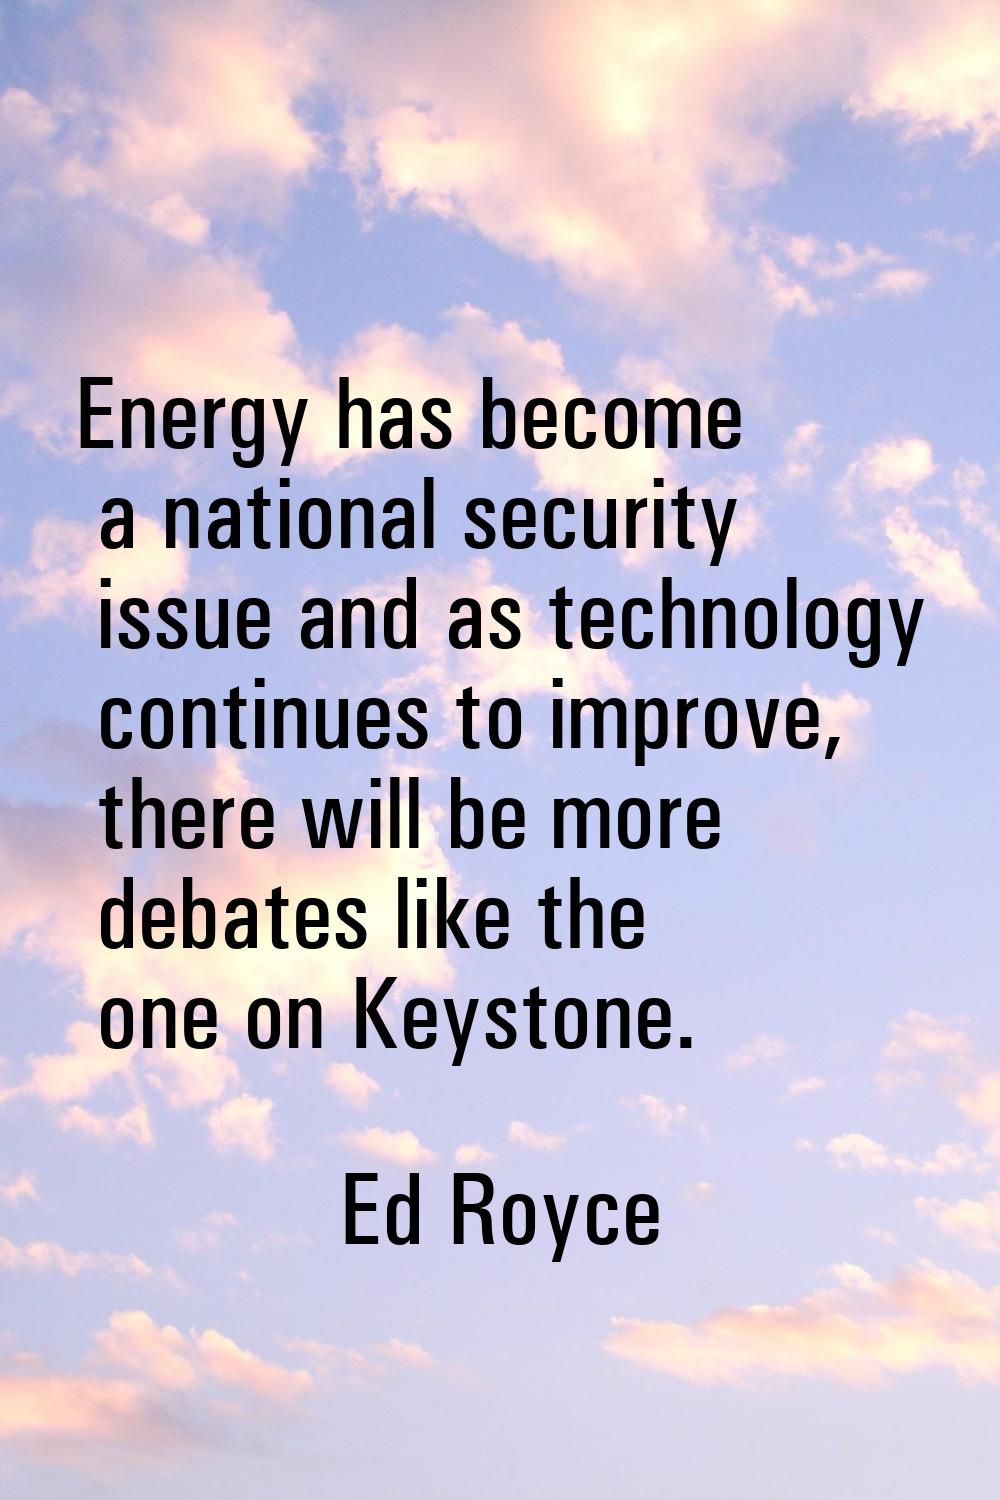 Energy has become a national security issue and as technology continues to improve, there will be m